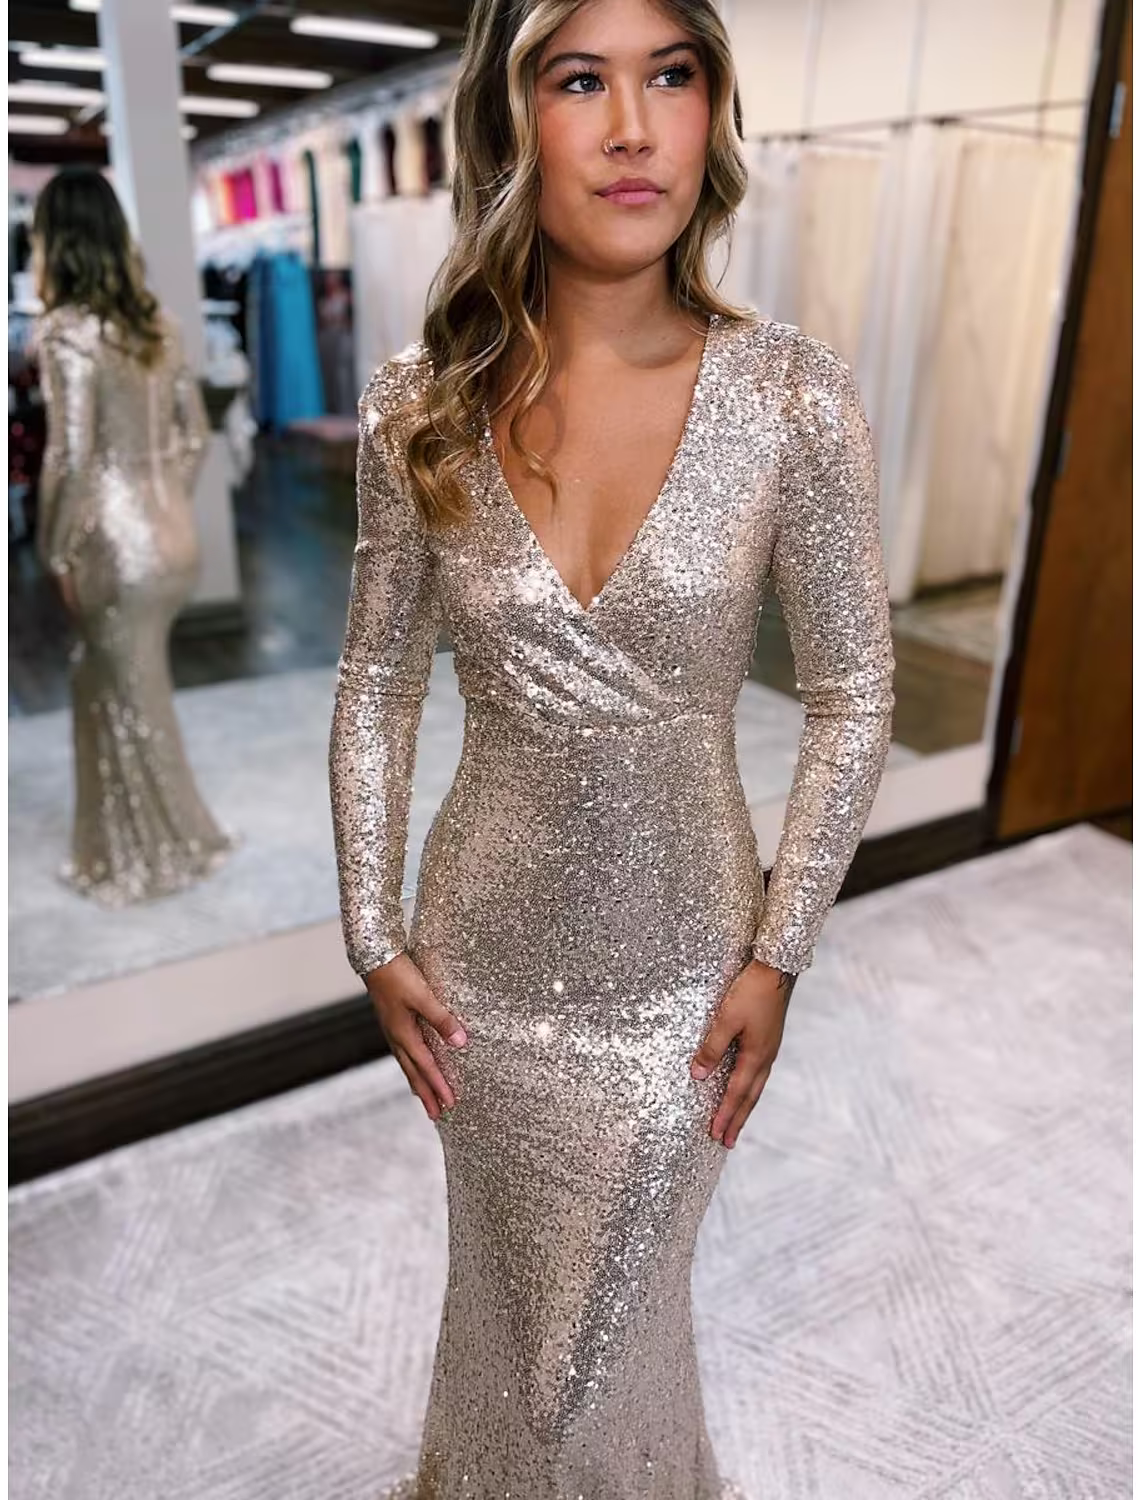 Evening Gown Sexy Dress Formal Floor Length Long Sleeve V Neck Sequined with